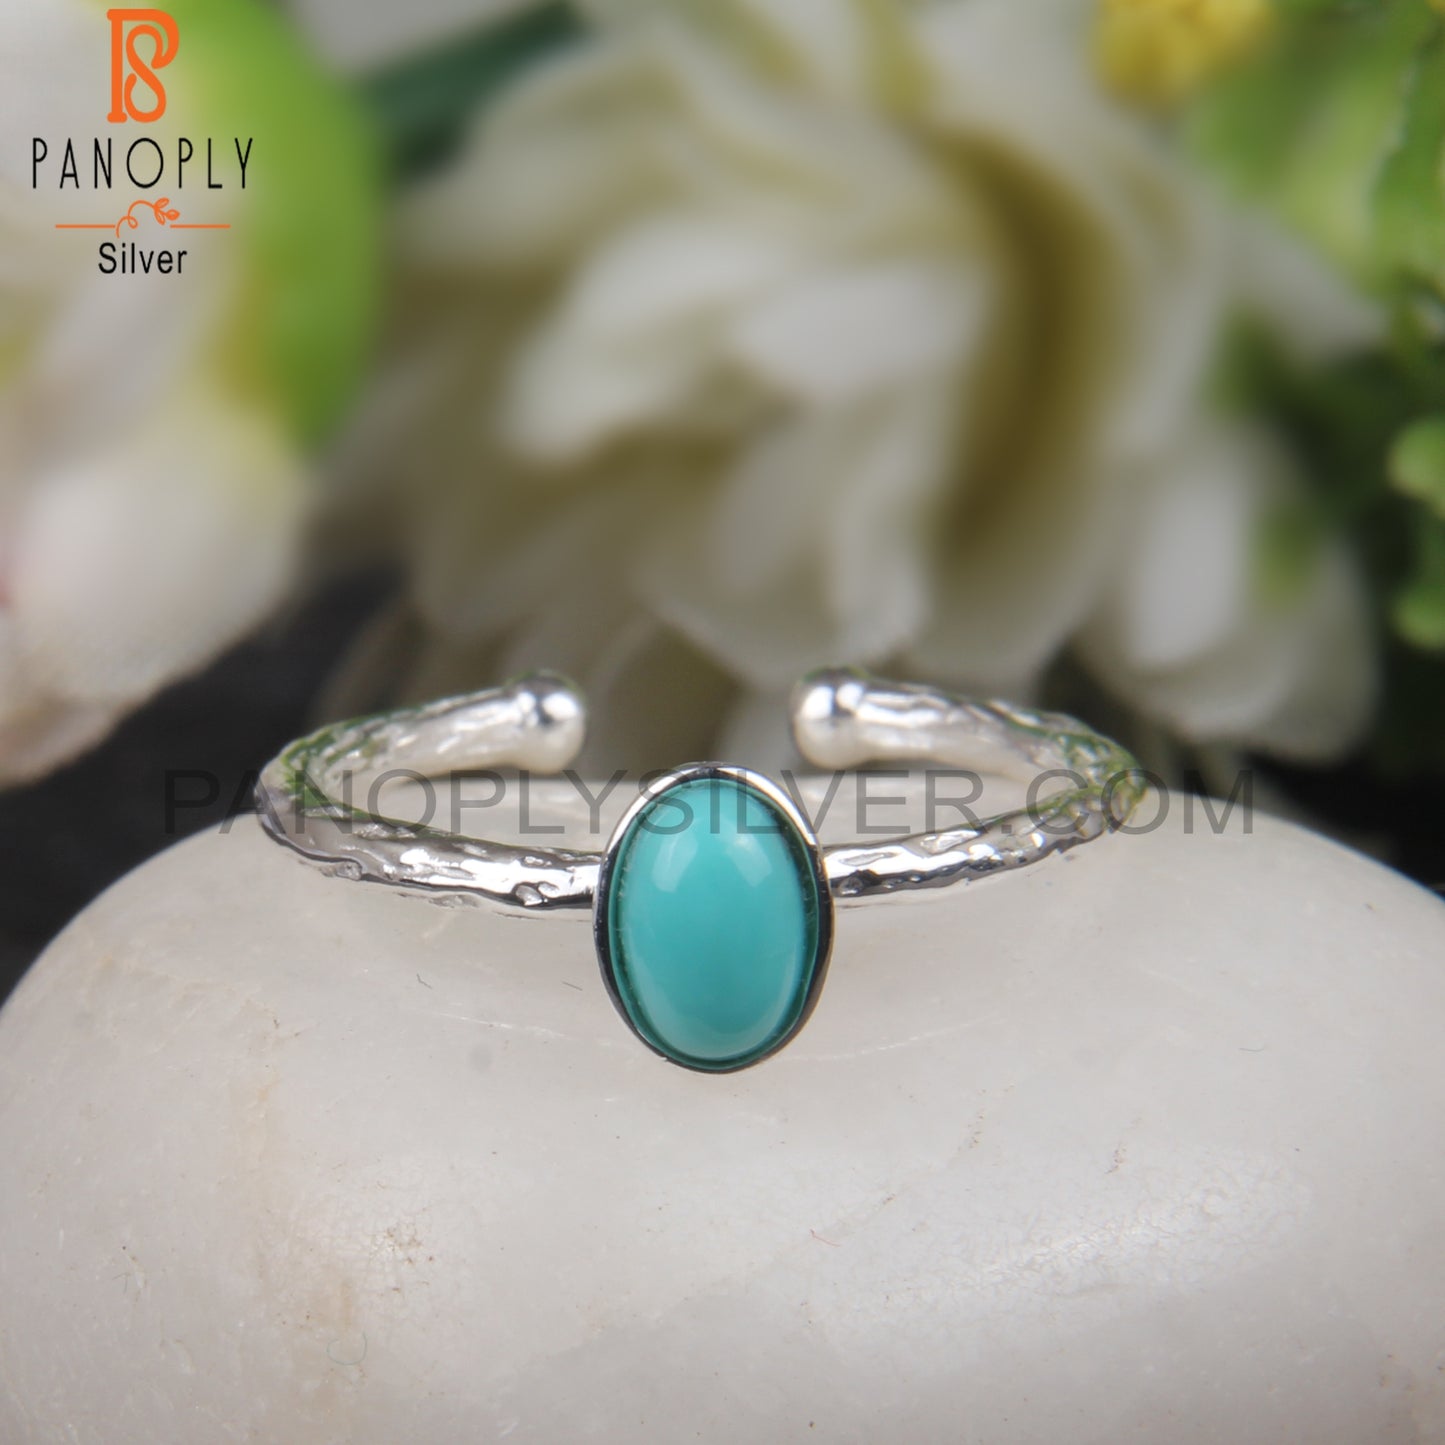 Arizona Turquoise Oval 925 Sterling Silver Adjustable Ring